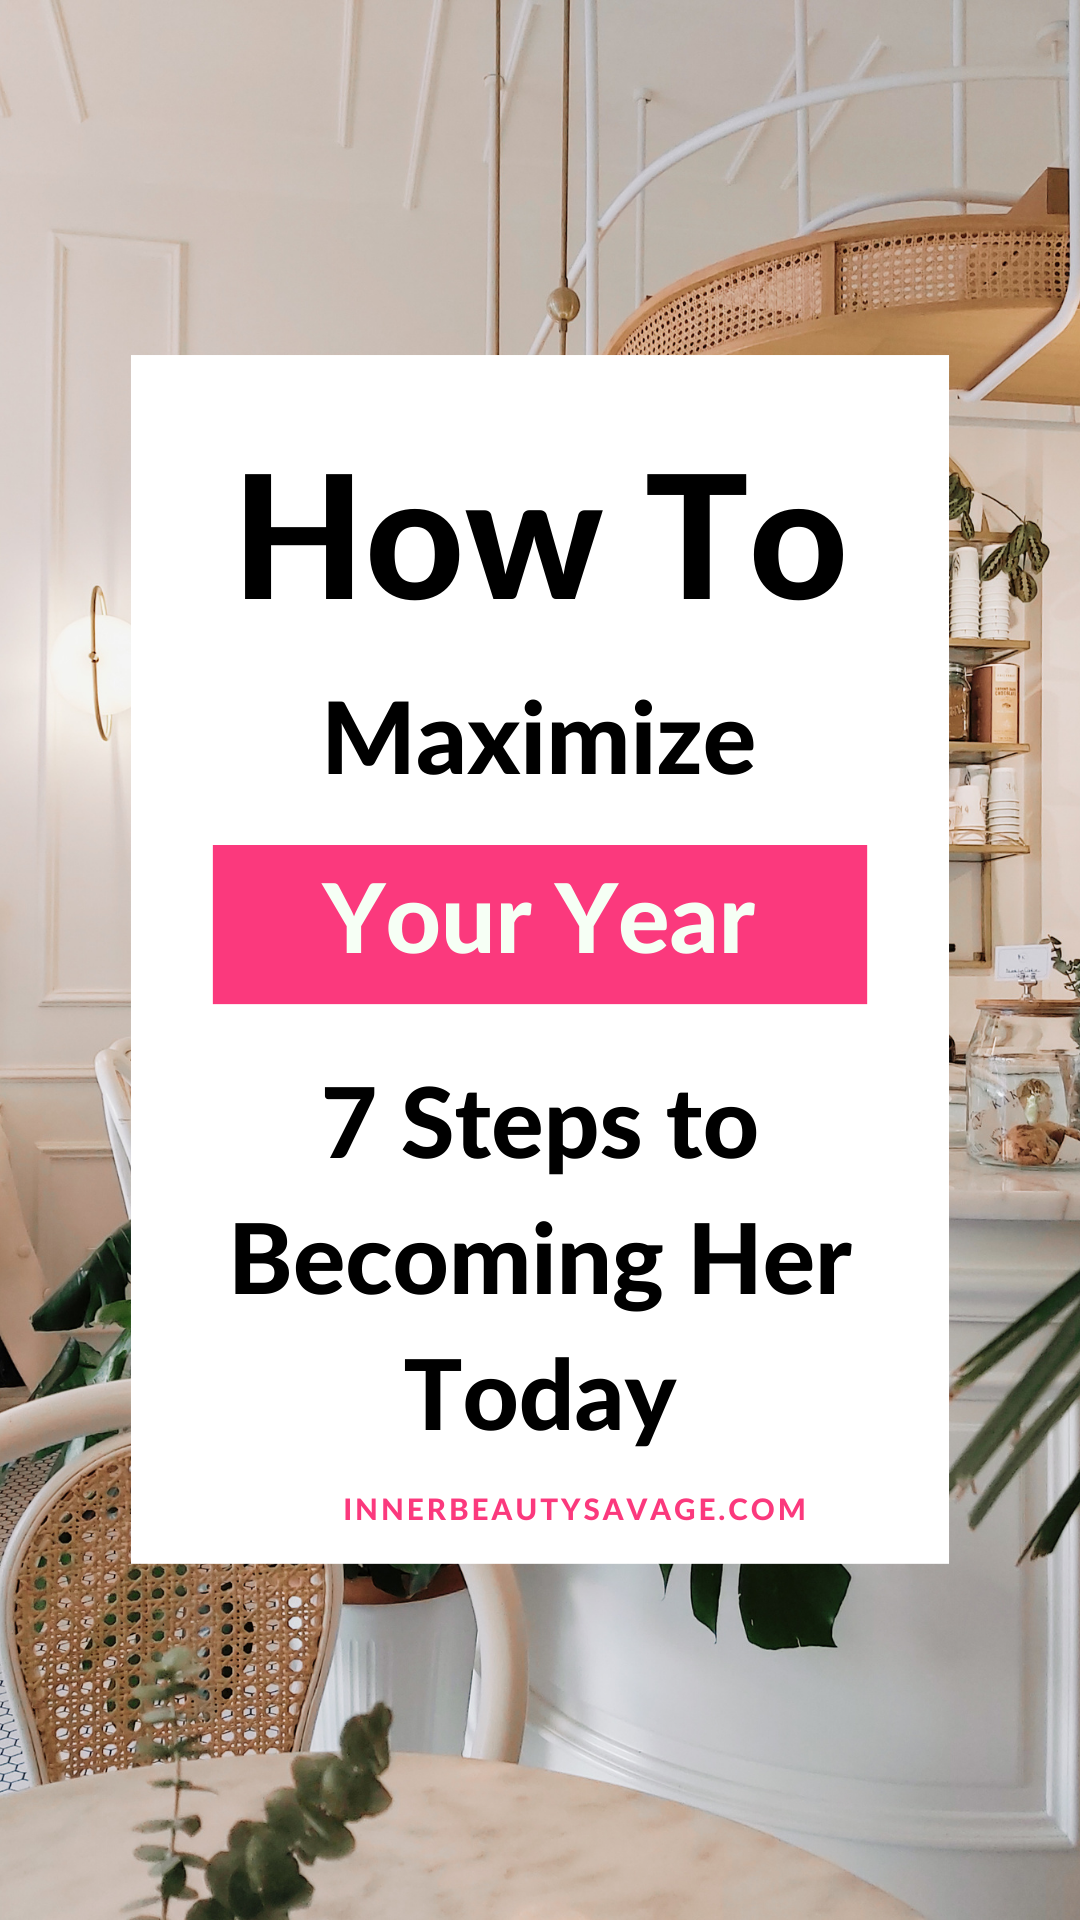 Pinterest pin on 7 steps to becoming her today